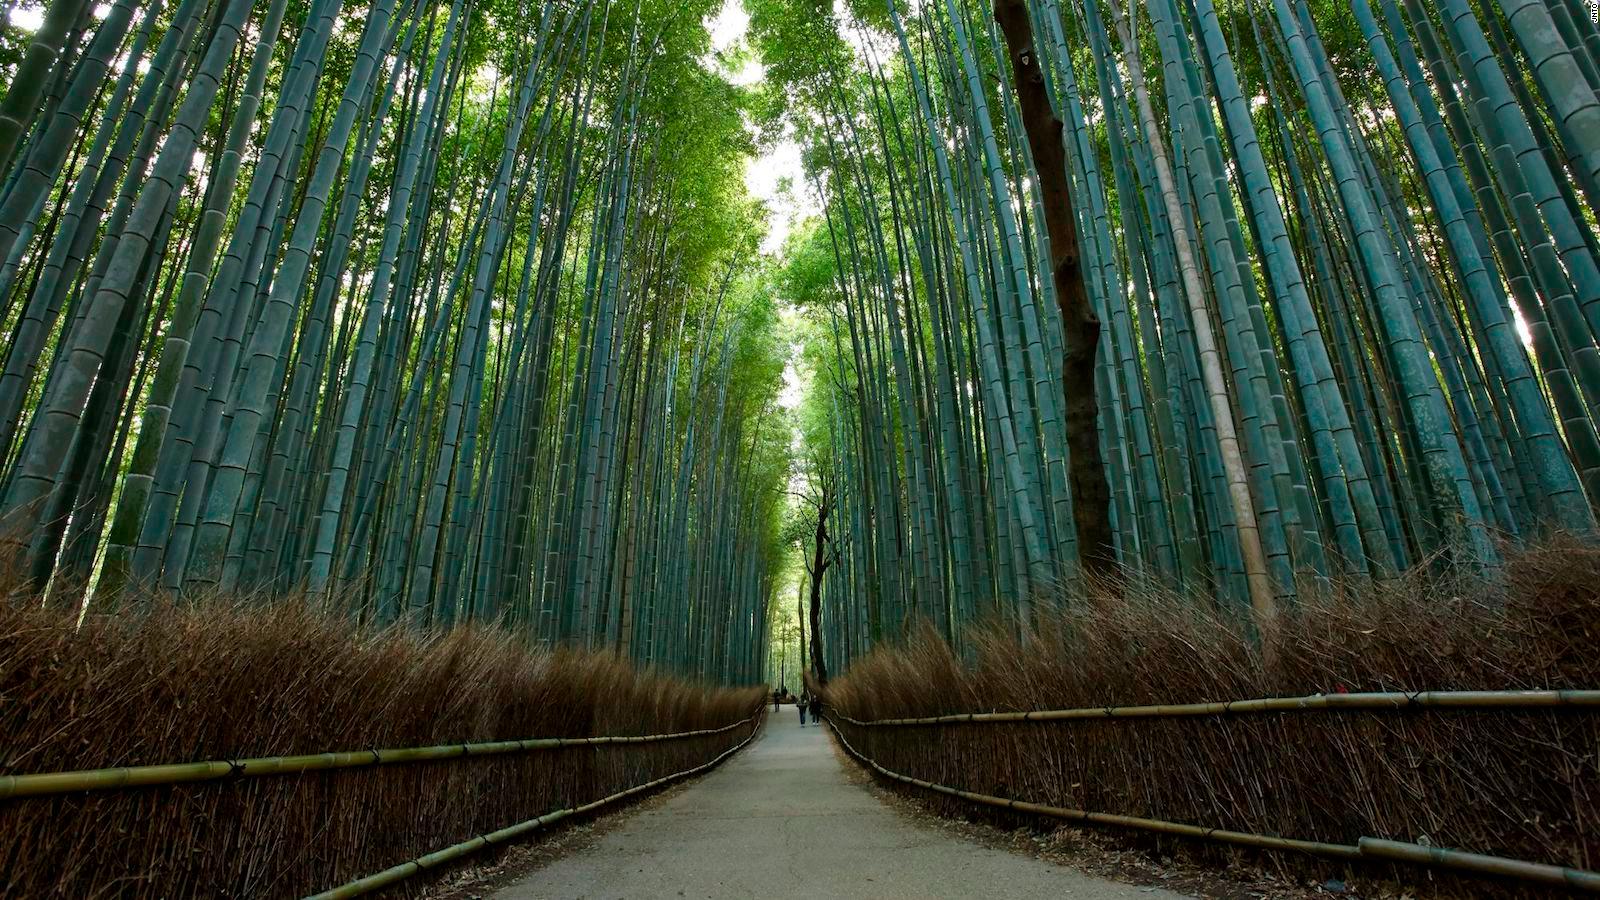 Sagano Bamboo Forest in Kyoto: One of world's prettiest groves | CNN Travel